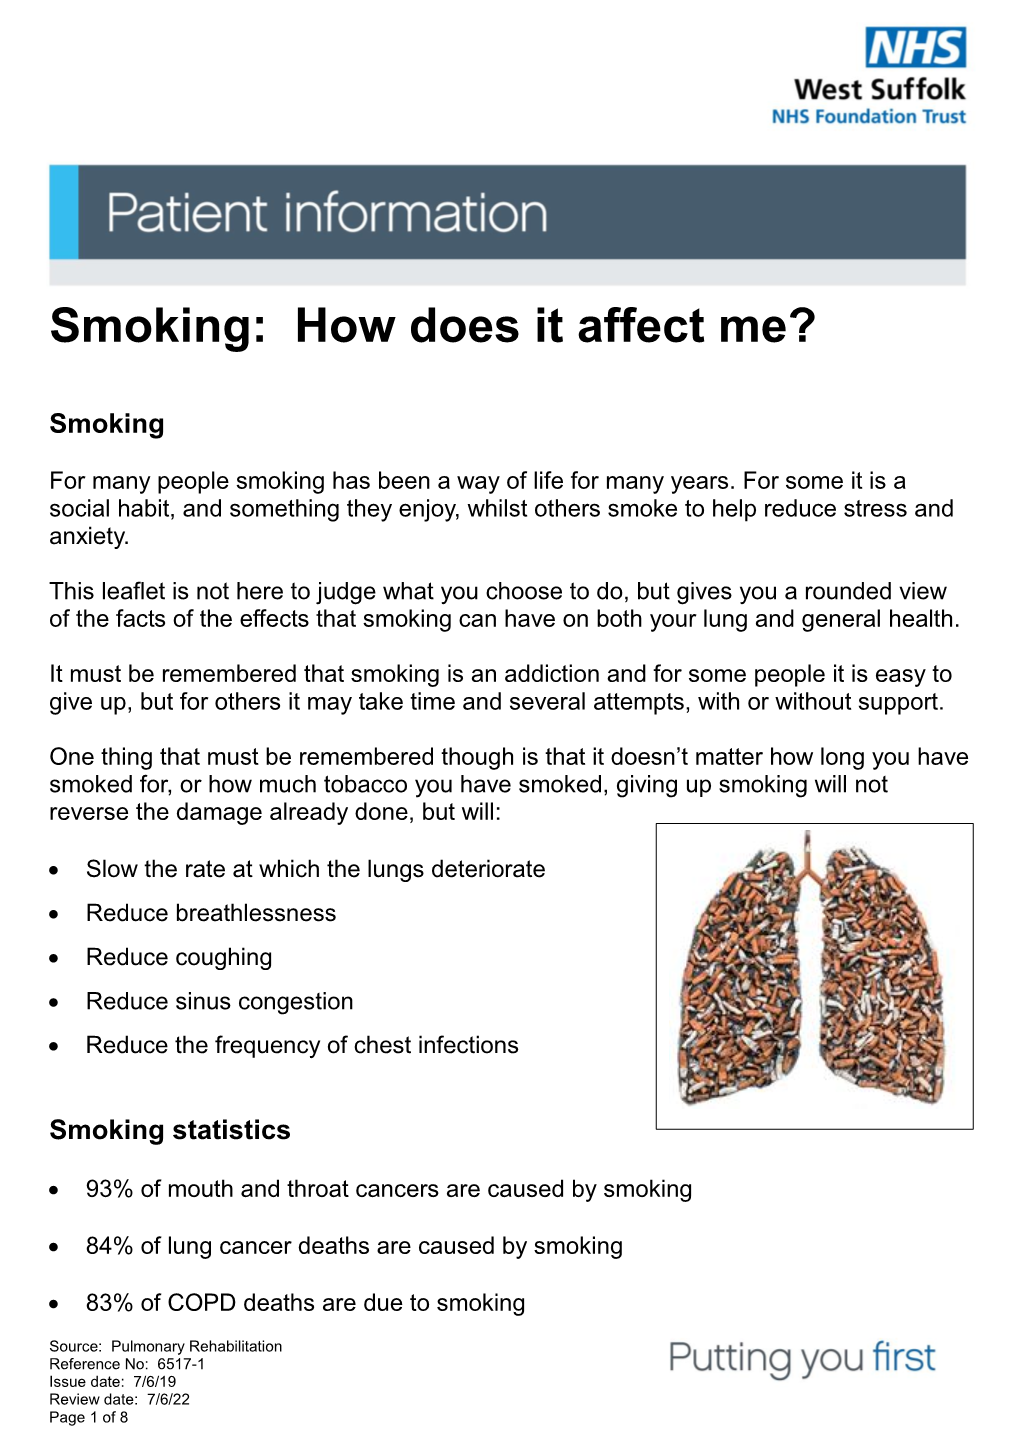 Smoking: How Does It Affect Me?